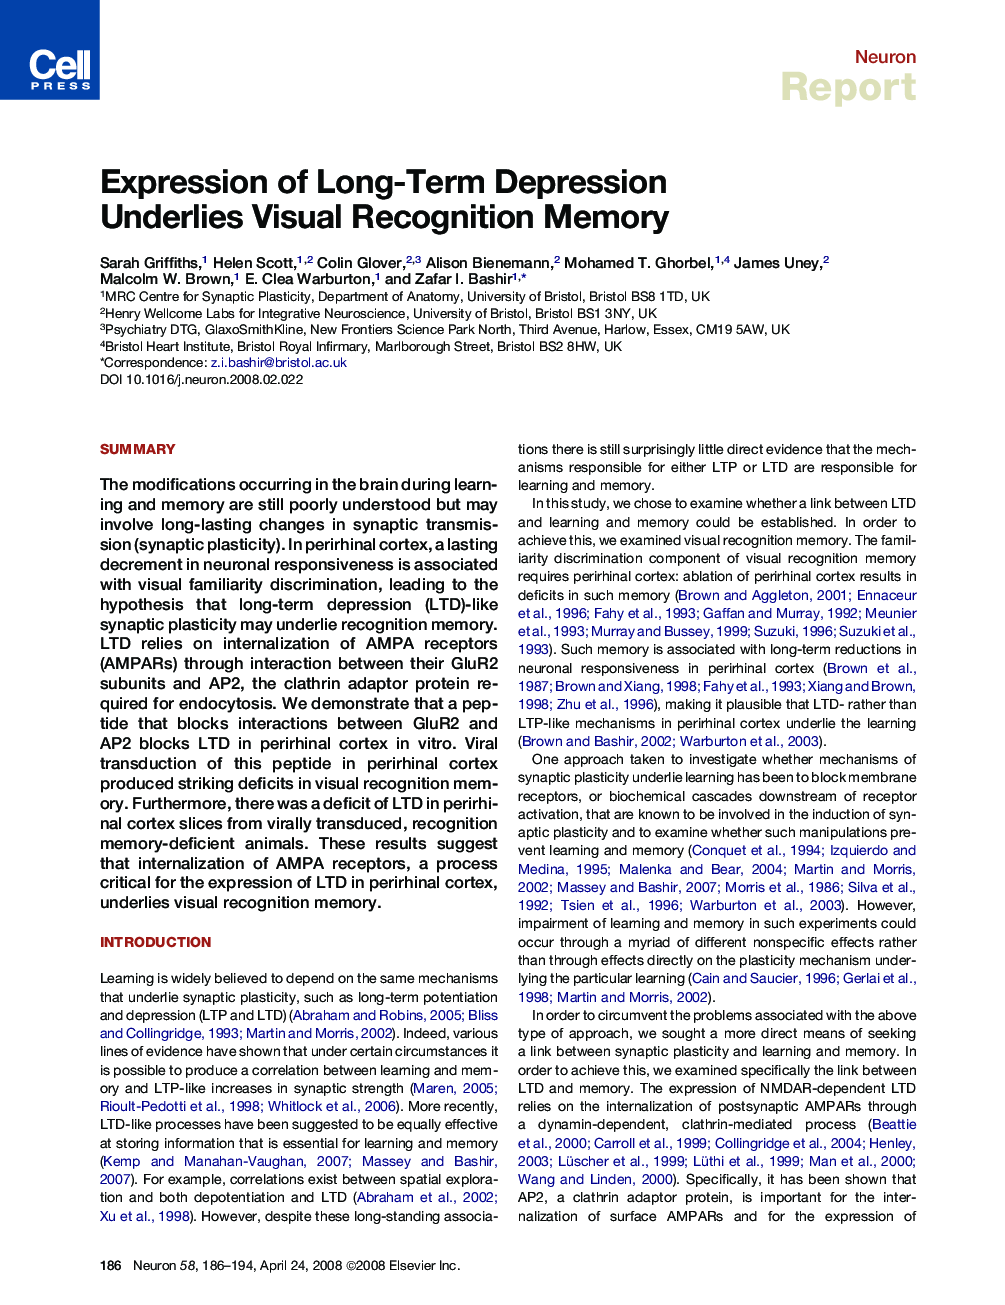 Expression of Long-Term Depression Underlies Visual Recognition Memory